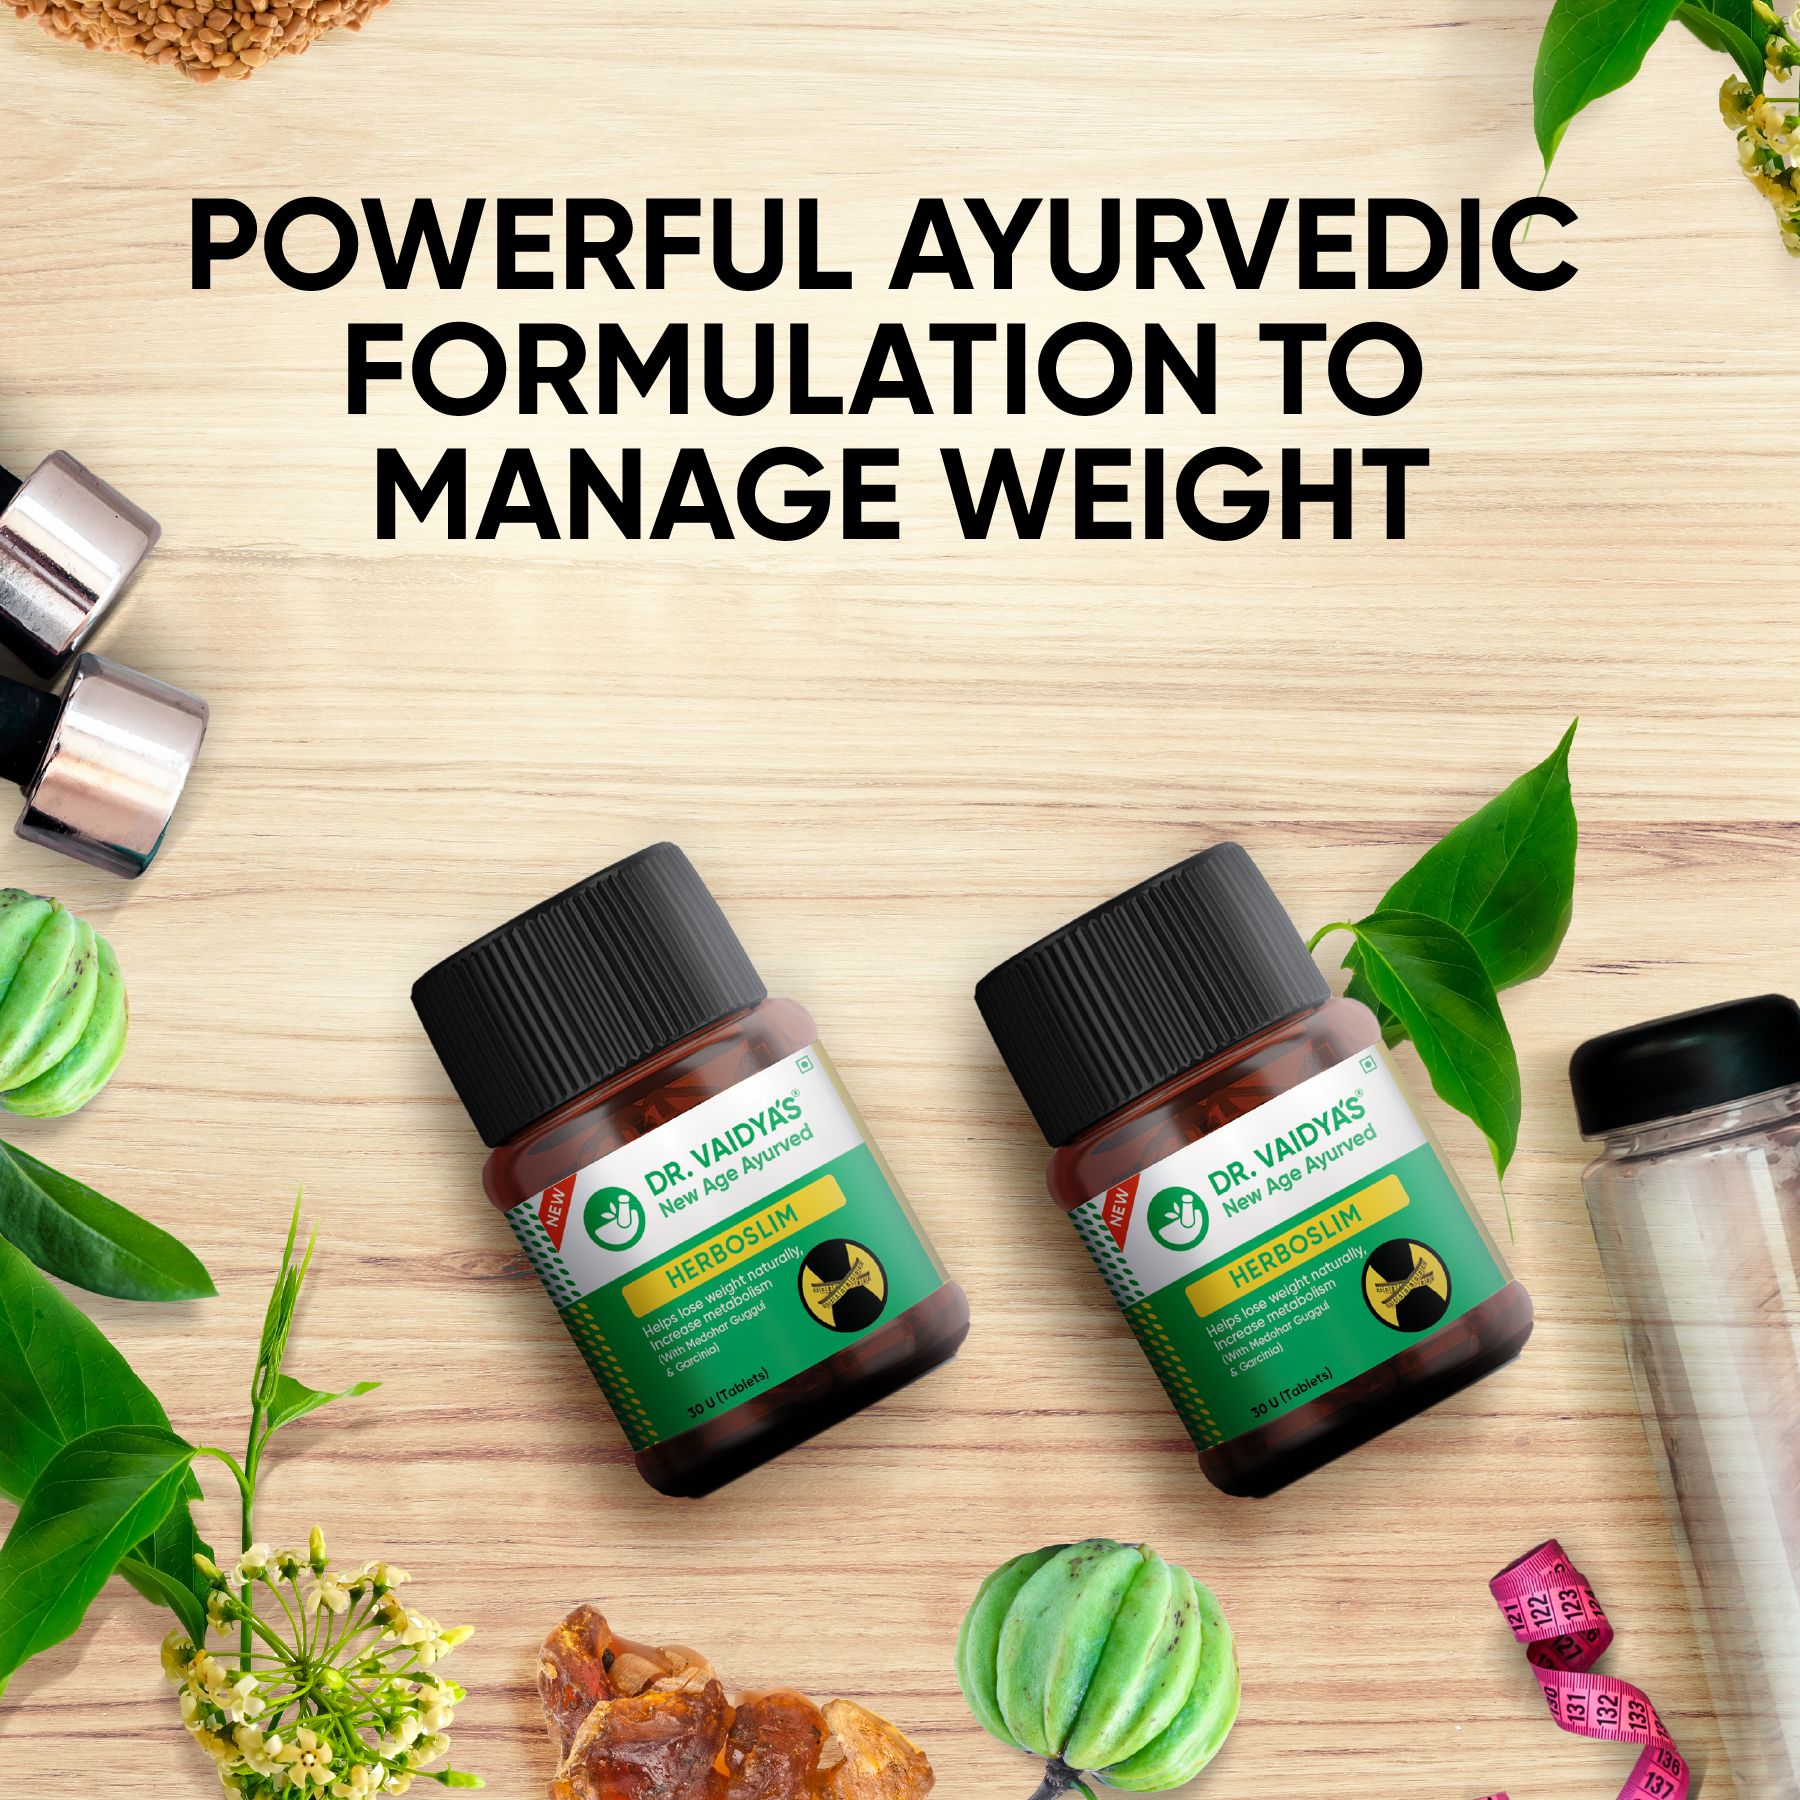 Ayurvedic weight loss tablets to manage weight